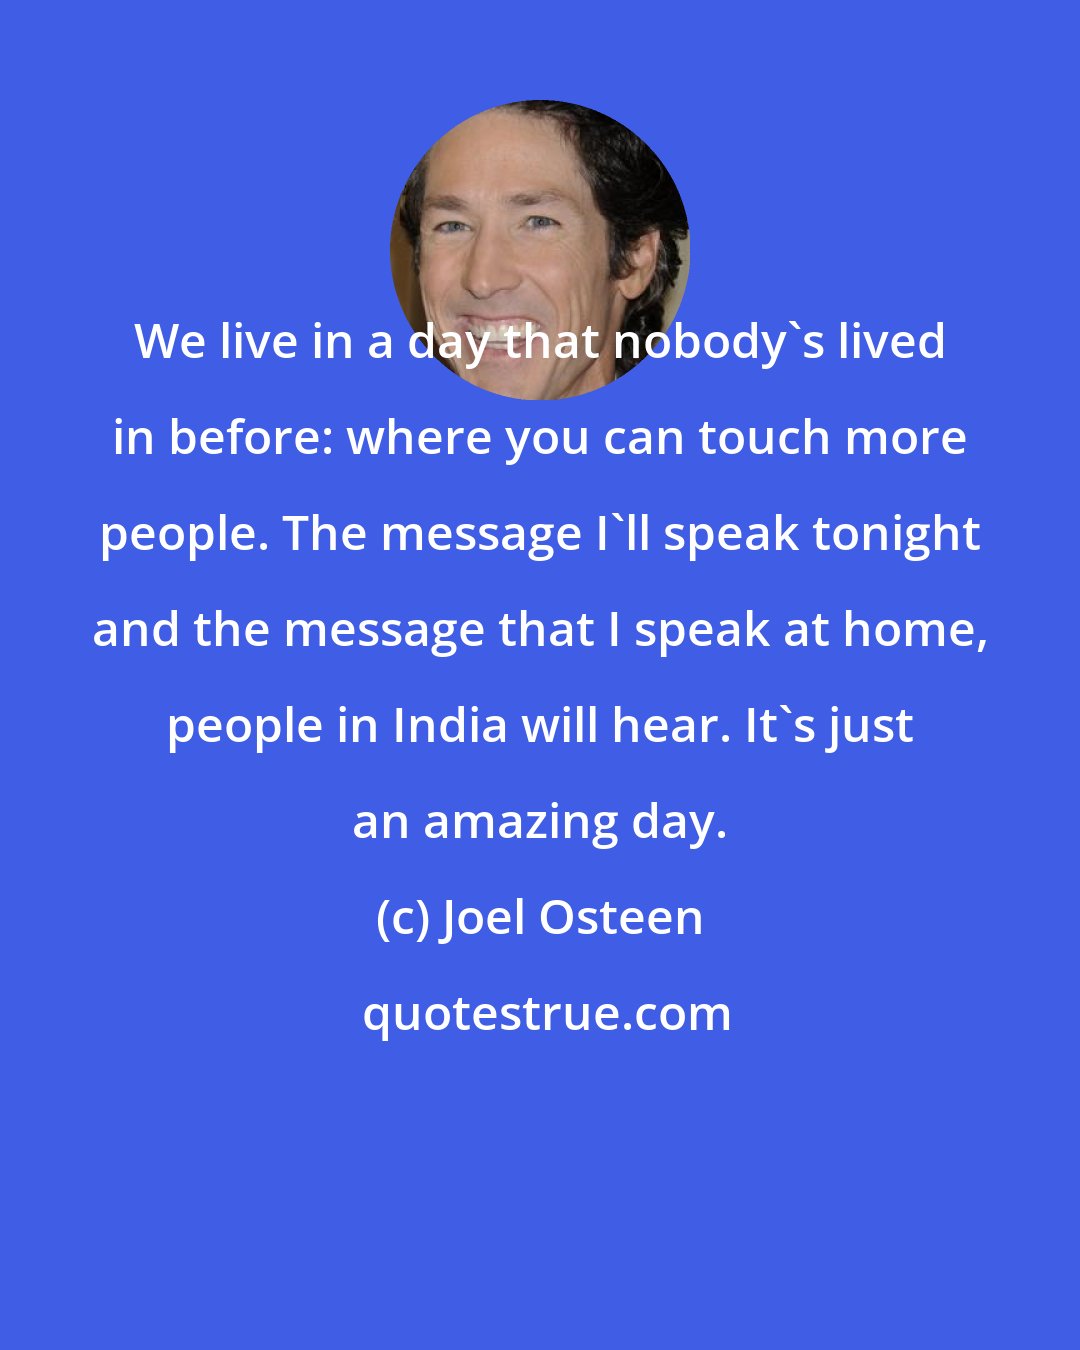 Joel Osteen: We live in a day that nobody's lived in before: where you can touch more people. The message I'll speak tonight and the message that I speak at home, people in India will hear. It's just an amazing day.